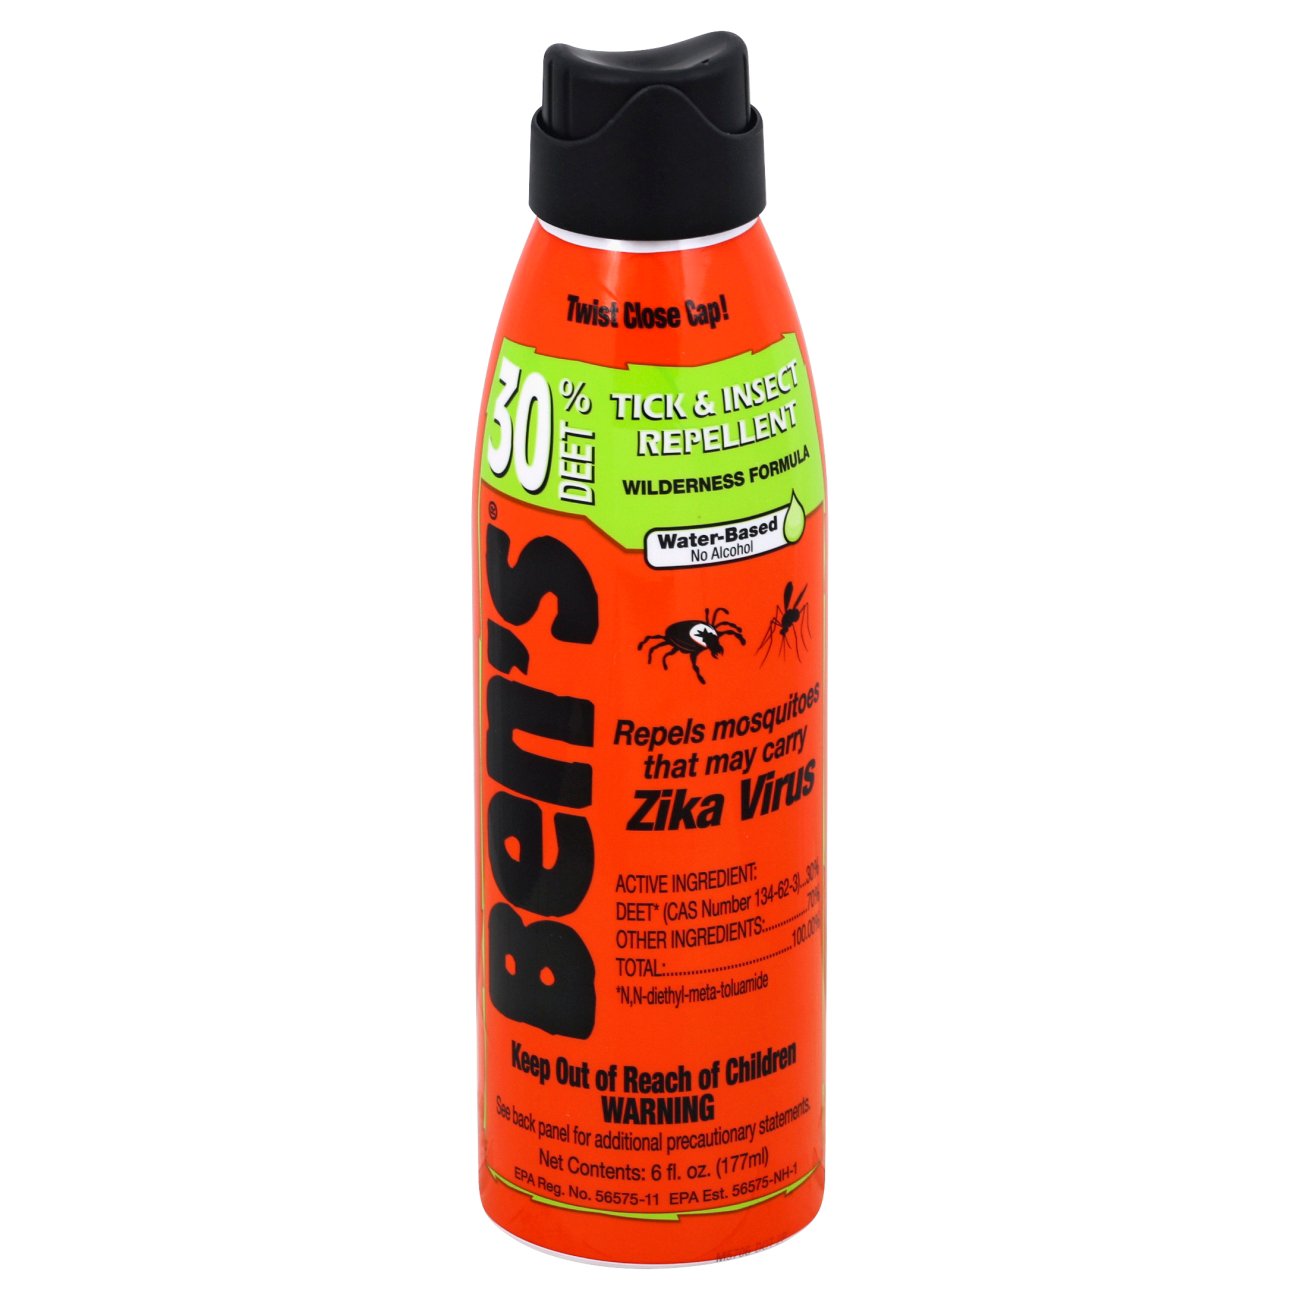 Ben's Wilderness Formula Tick And Insect Repellent